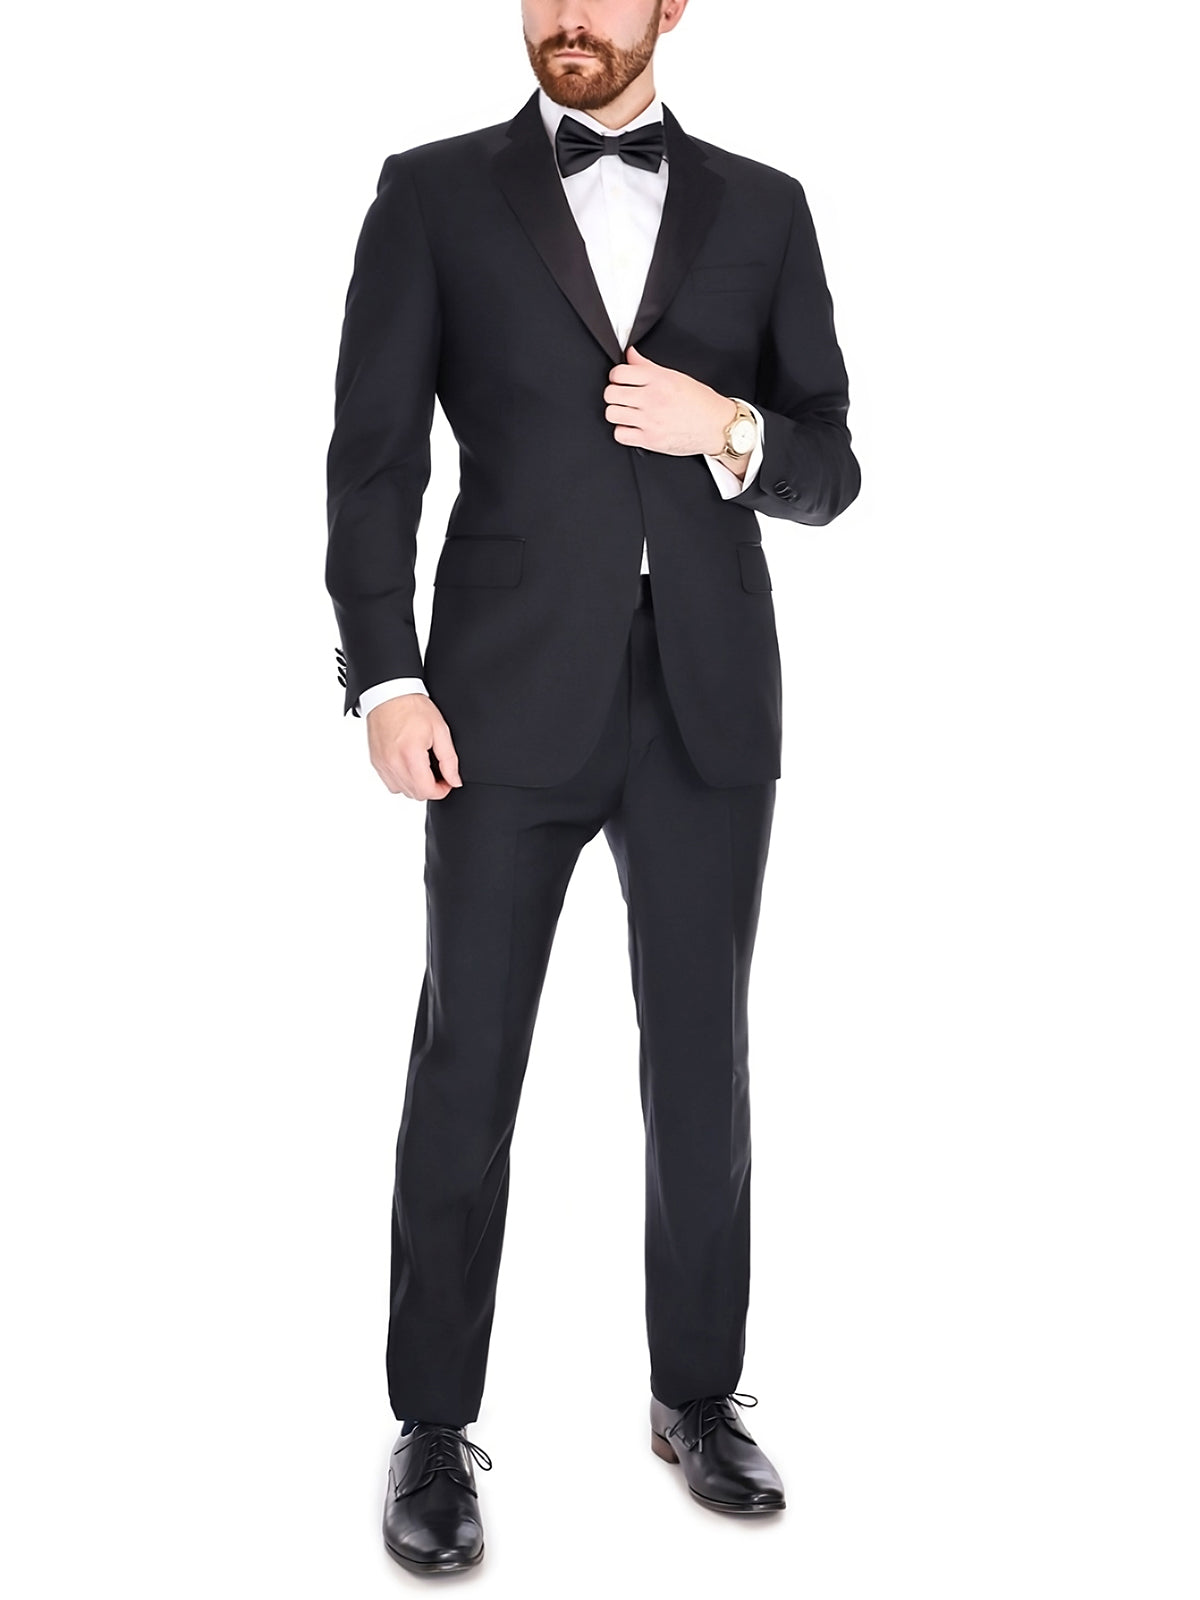 Blujacket Mens Solid Black 100% Wool Regular Fit Tuxedo Suit With Satin Lapel